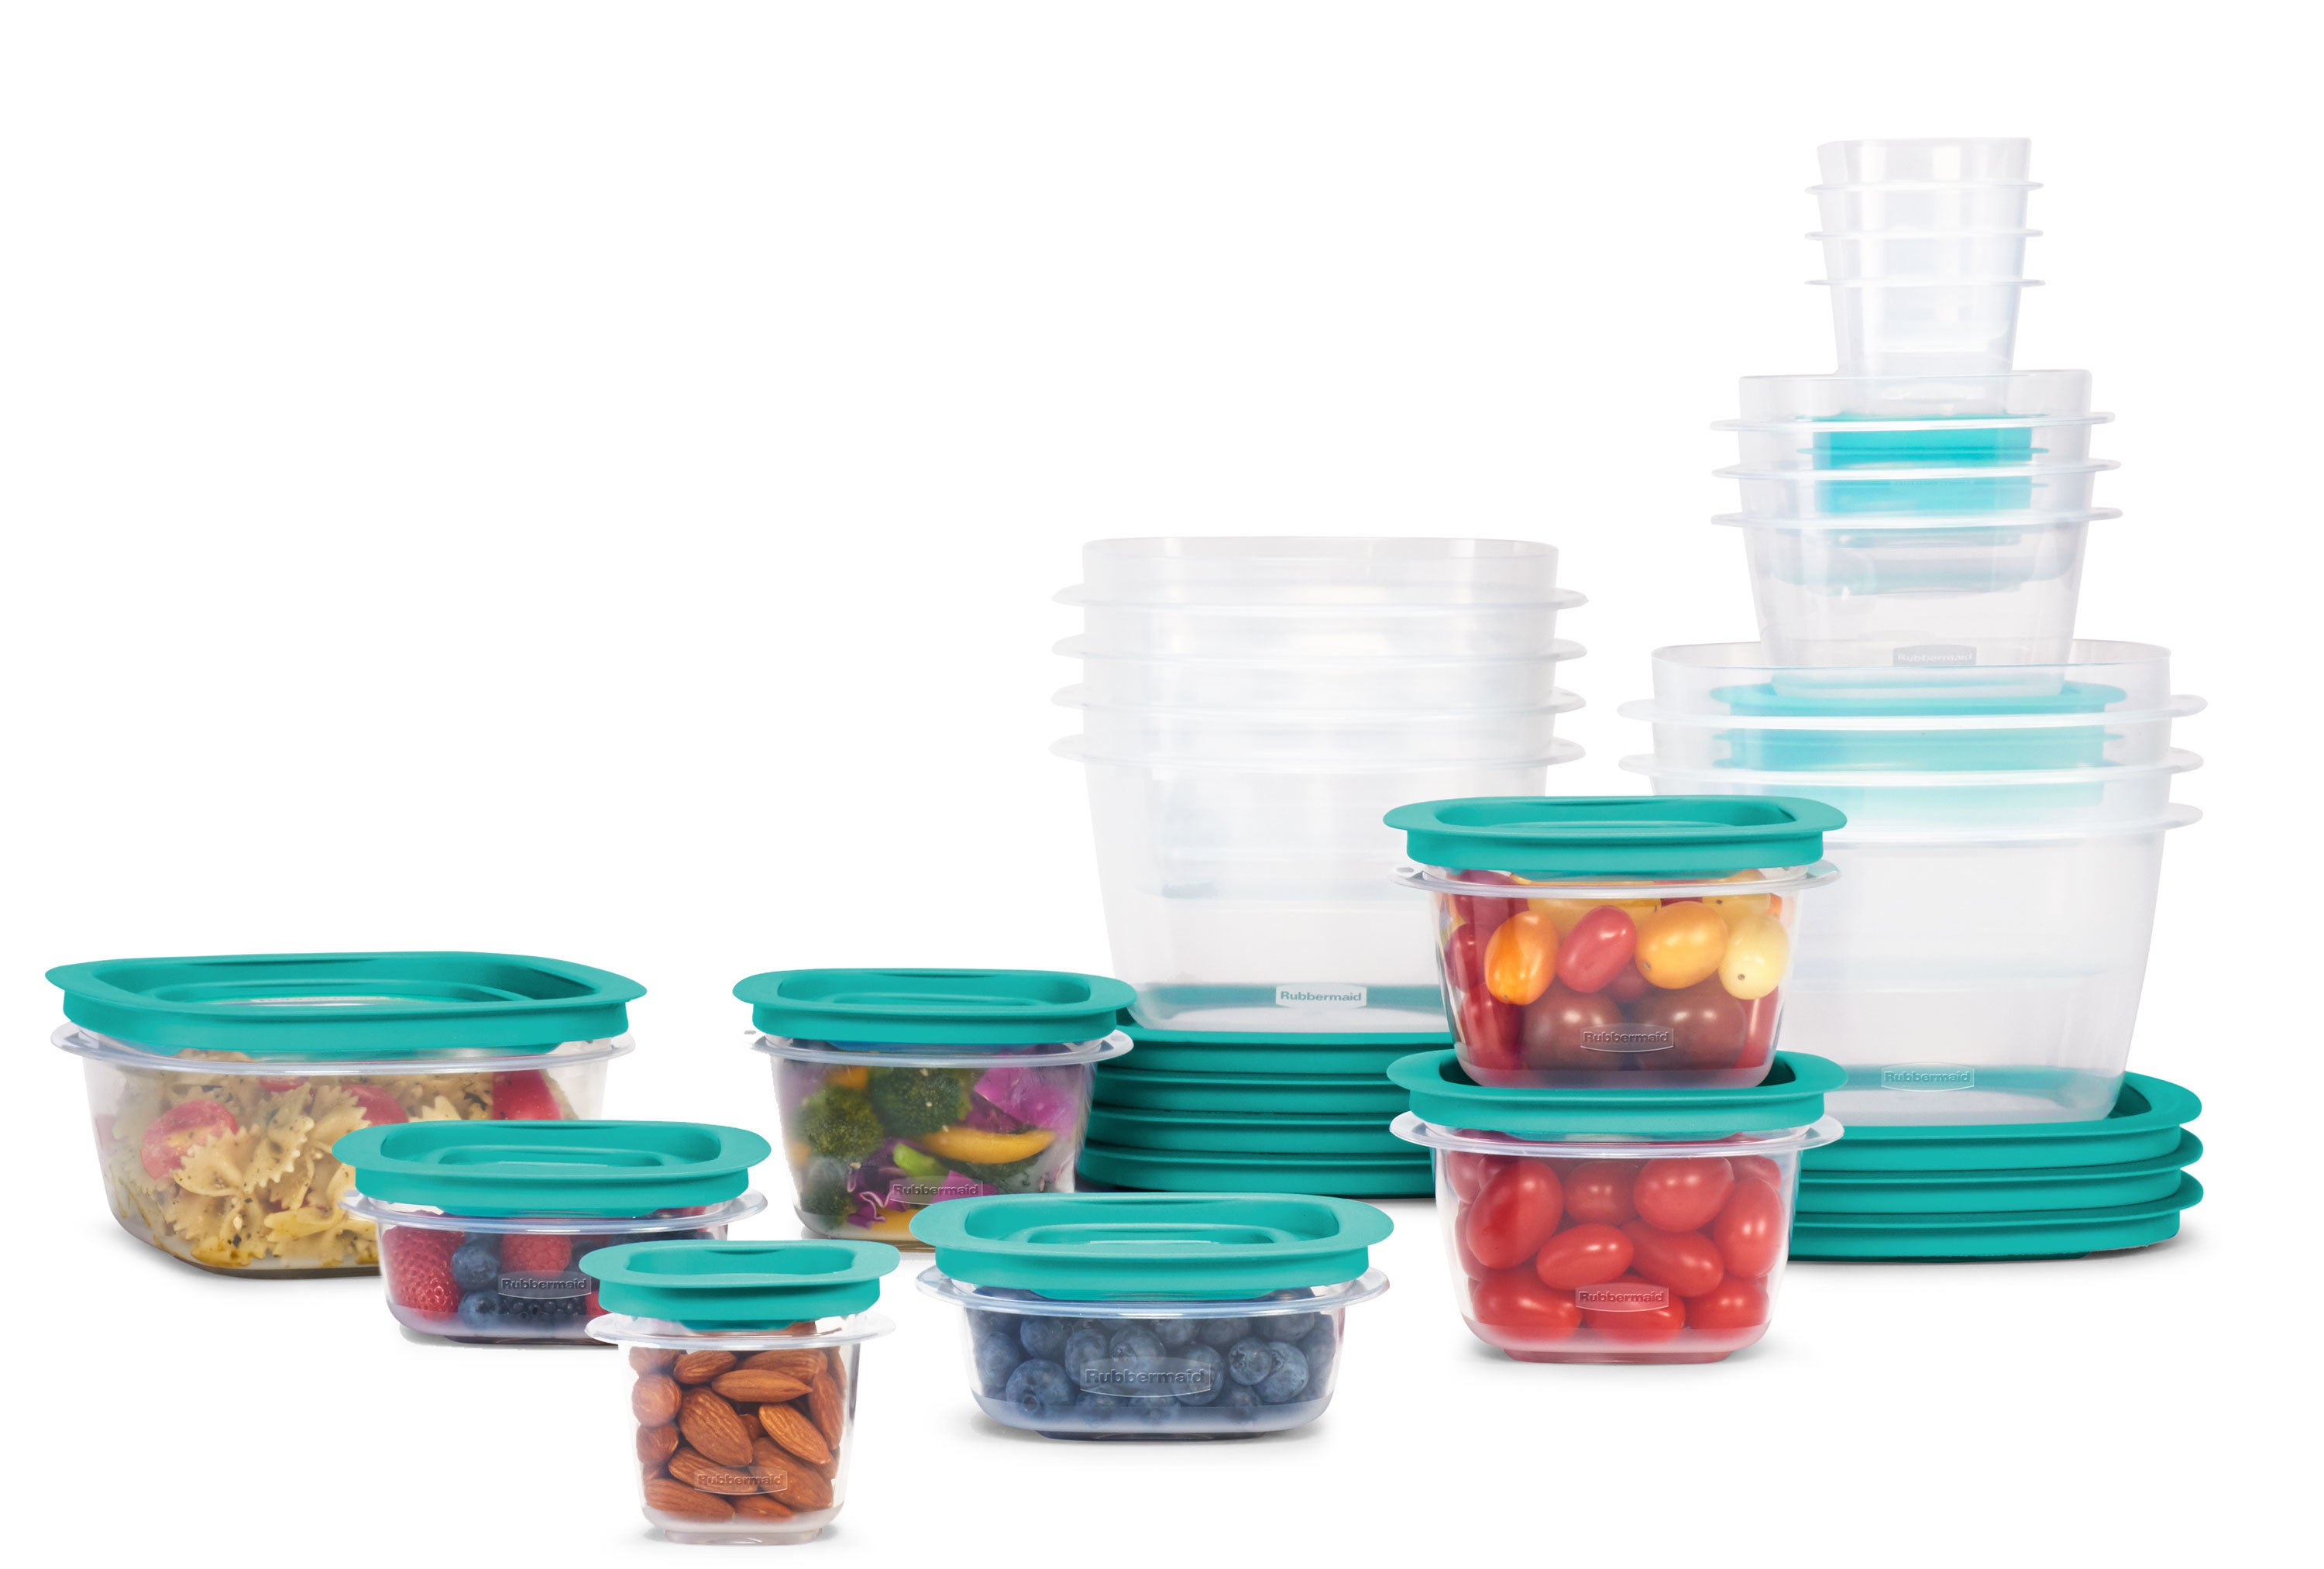 42 pieces of a food storage container set